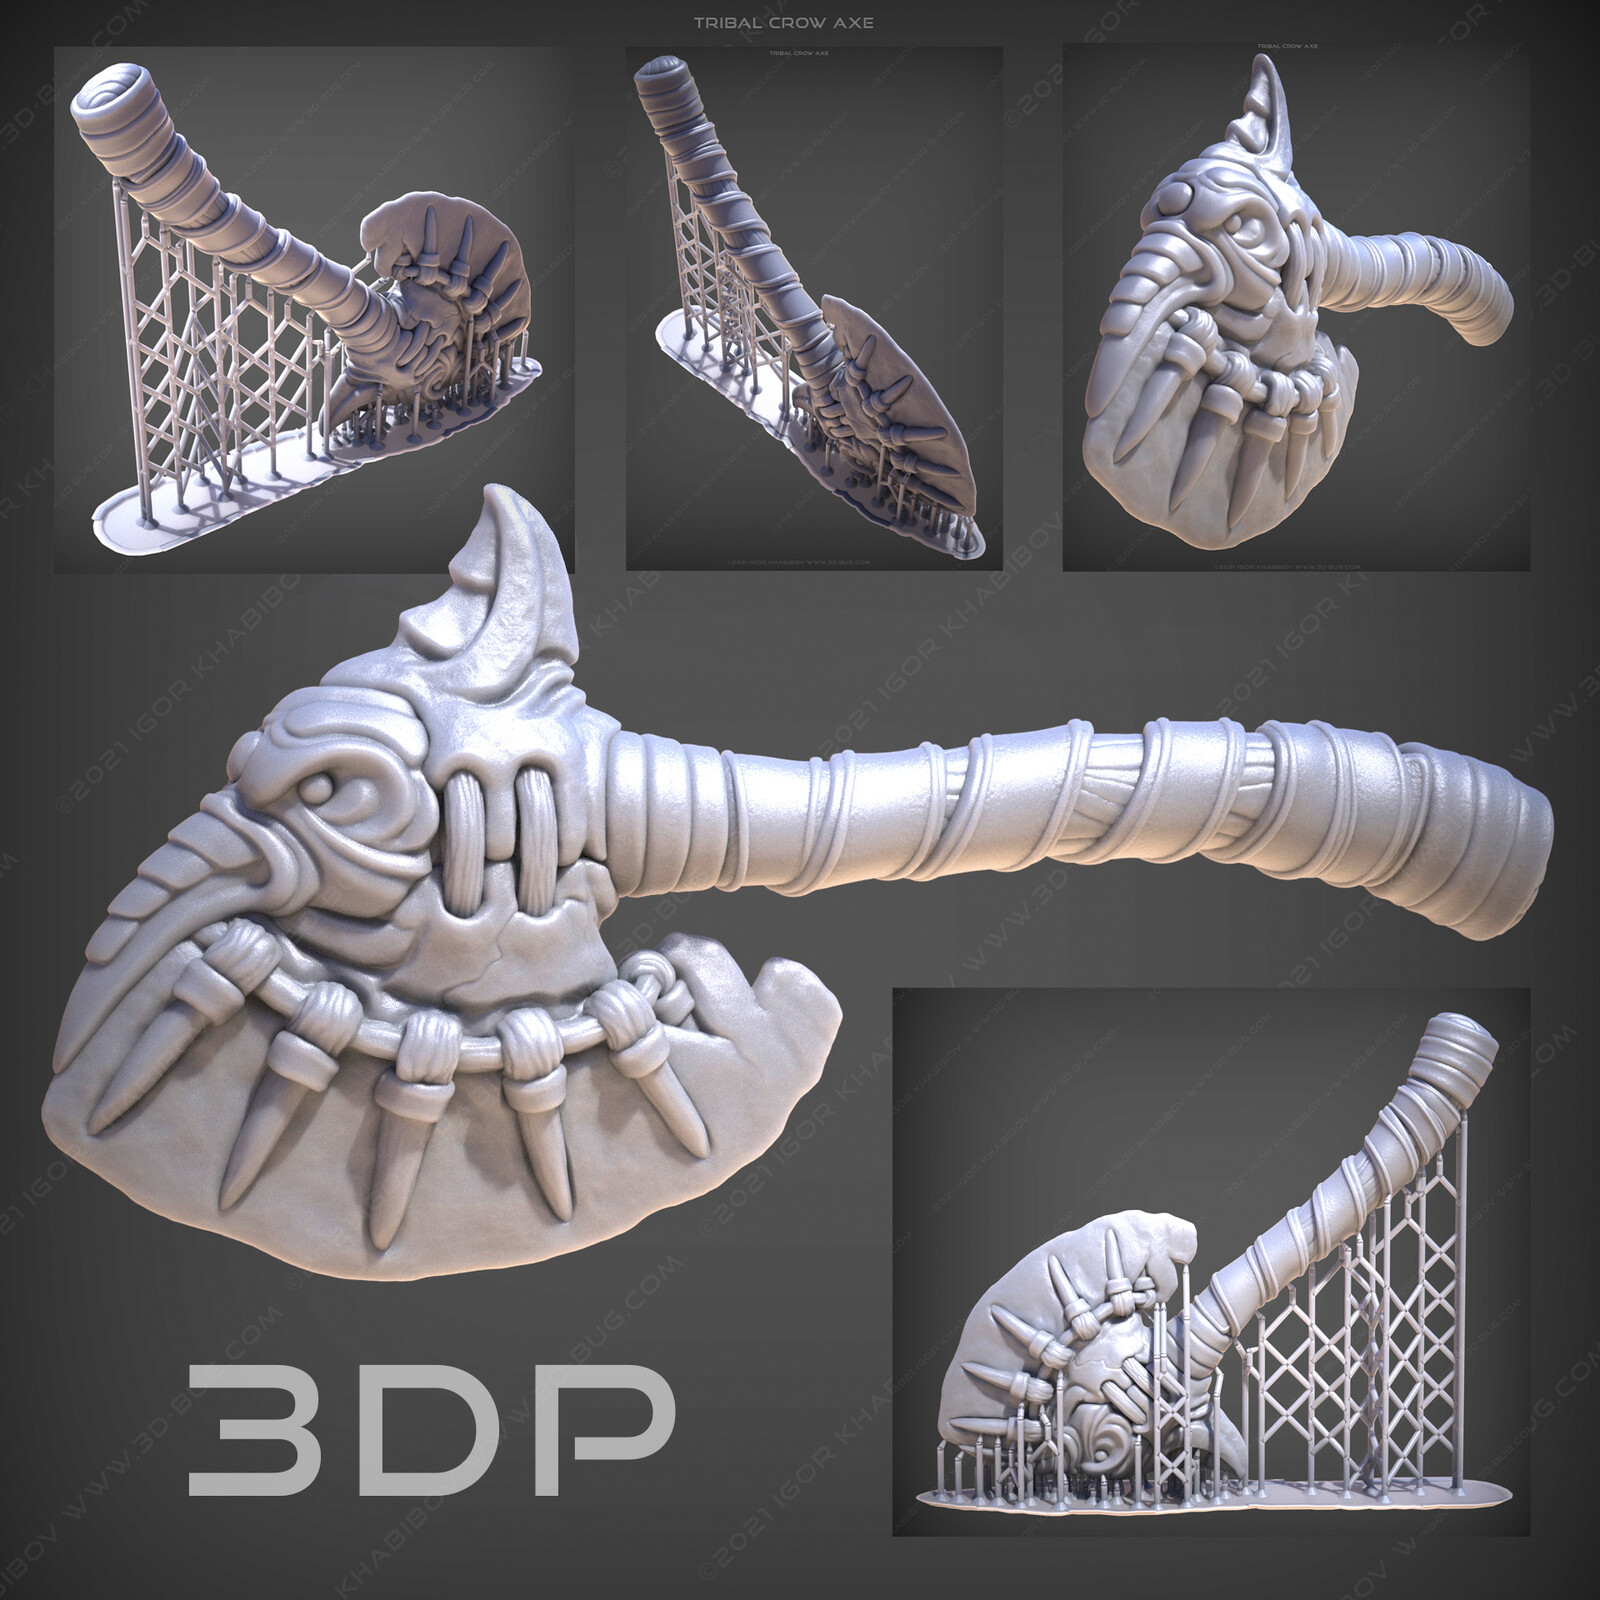 https://www.cgtrader.com/3d-print-models/games-toys/game-accessories/tribal-crow-axe-3dp